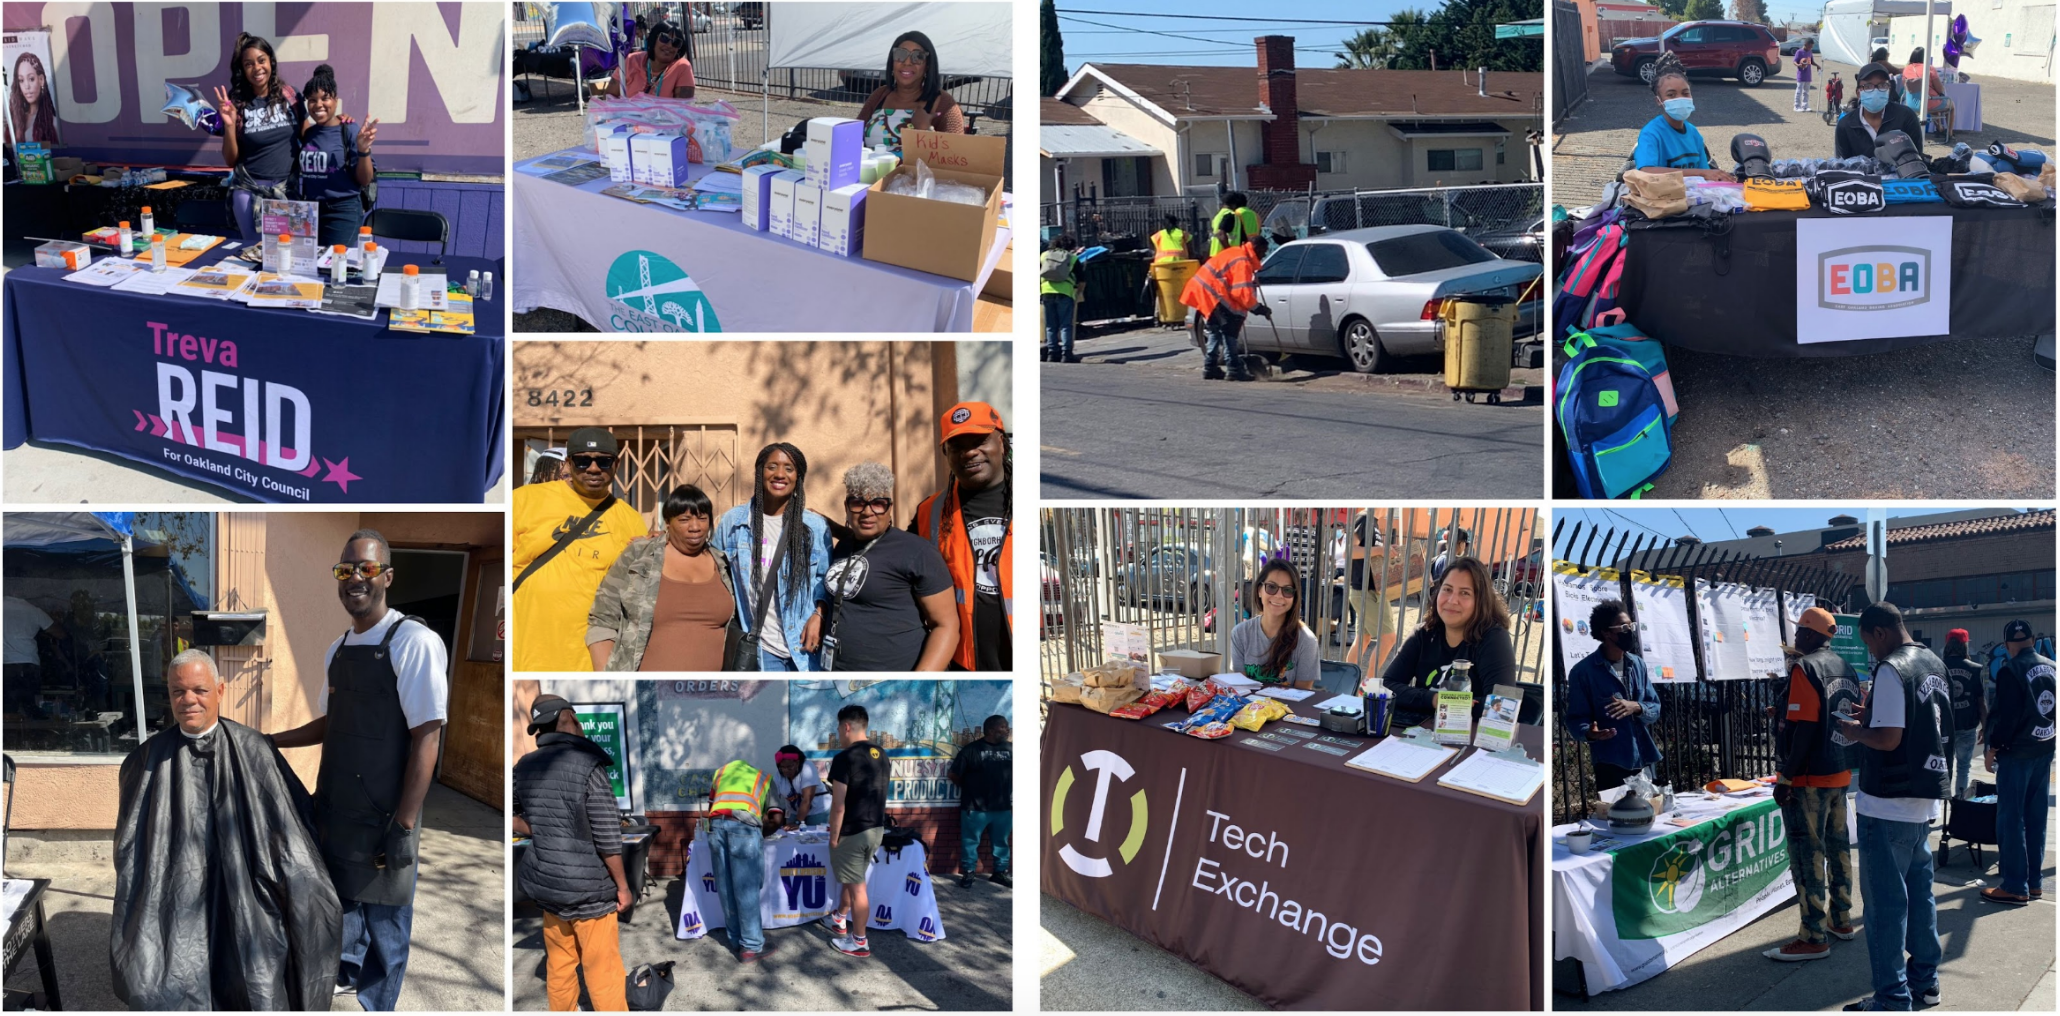 Councilmember Treva Reid partners with several organizations to provide resources to residents for the 3rd Community Safety Task Force Day of Action event.